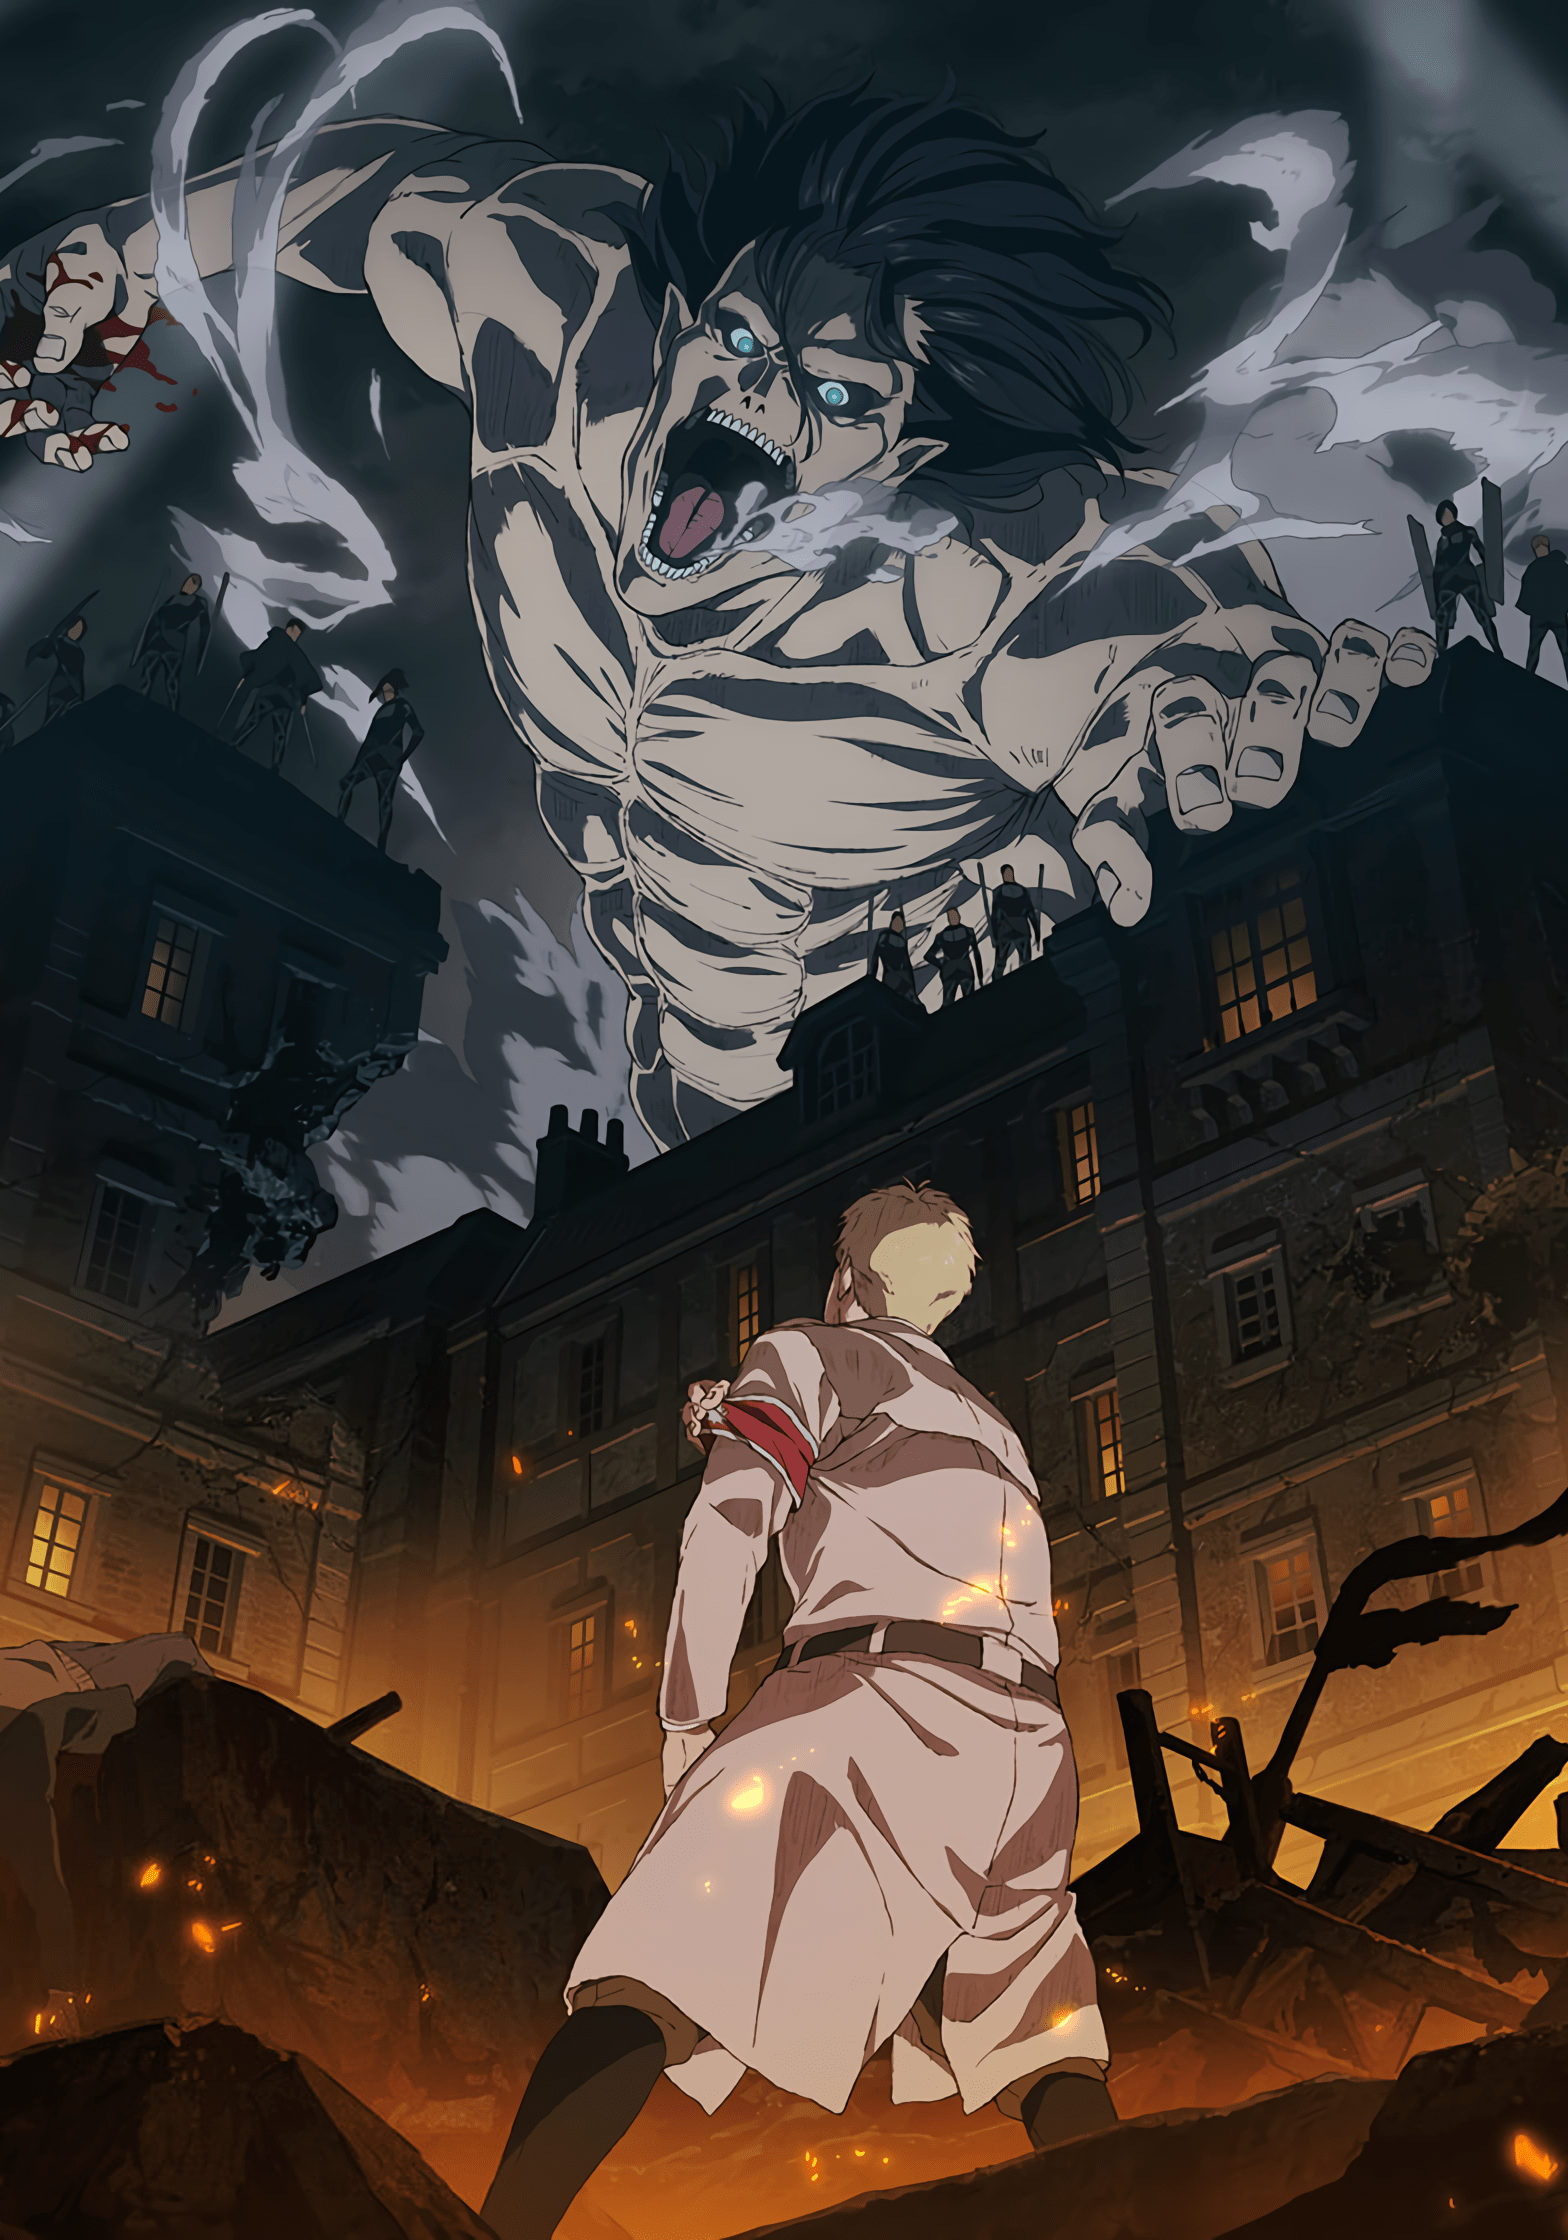 Aot Phone Wallpapers Wallpaper Cave L'manburg can be independent, but l'manburg can't be free — dreamwastaken. wallpaper cave